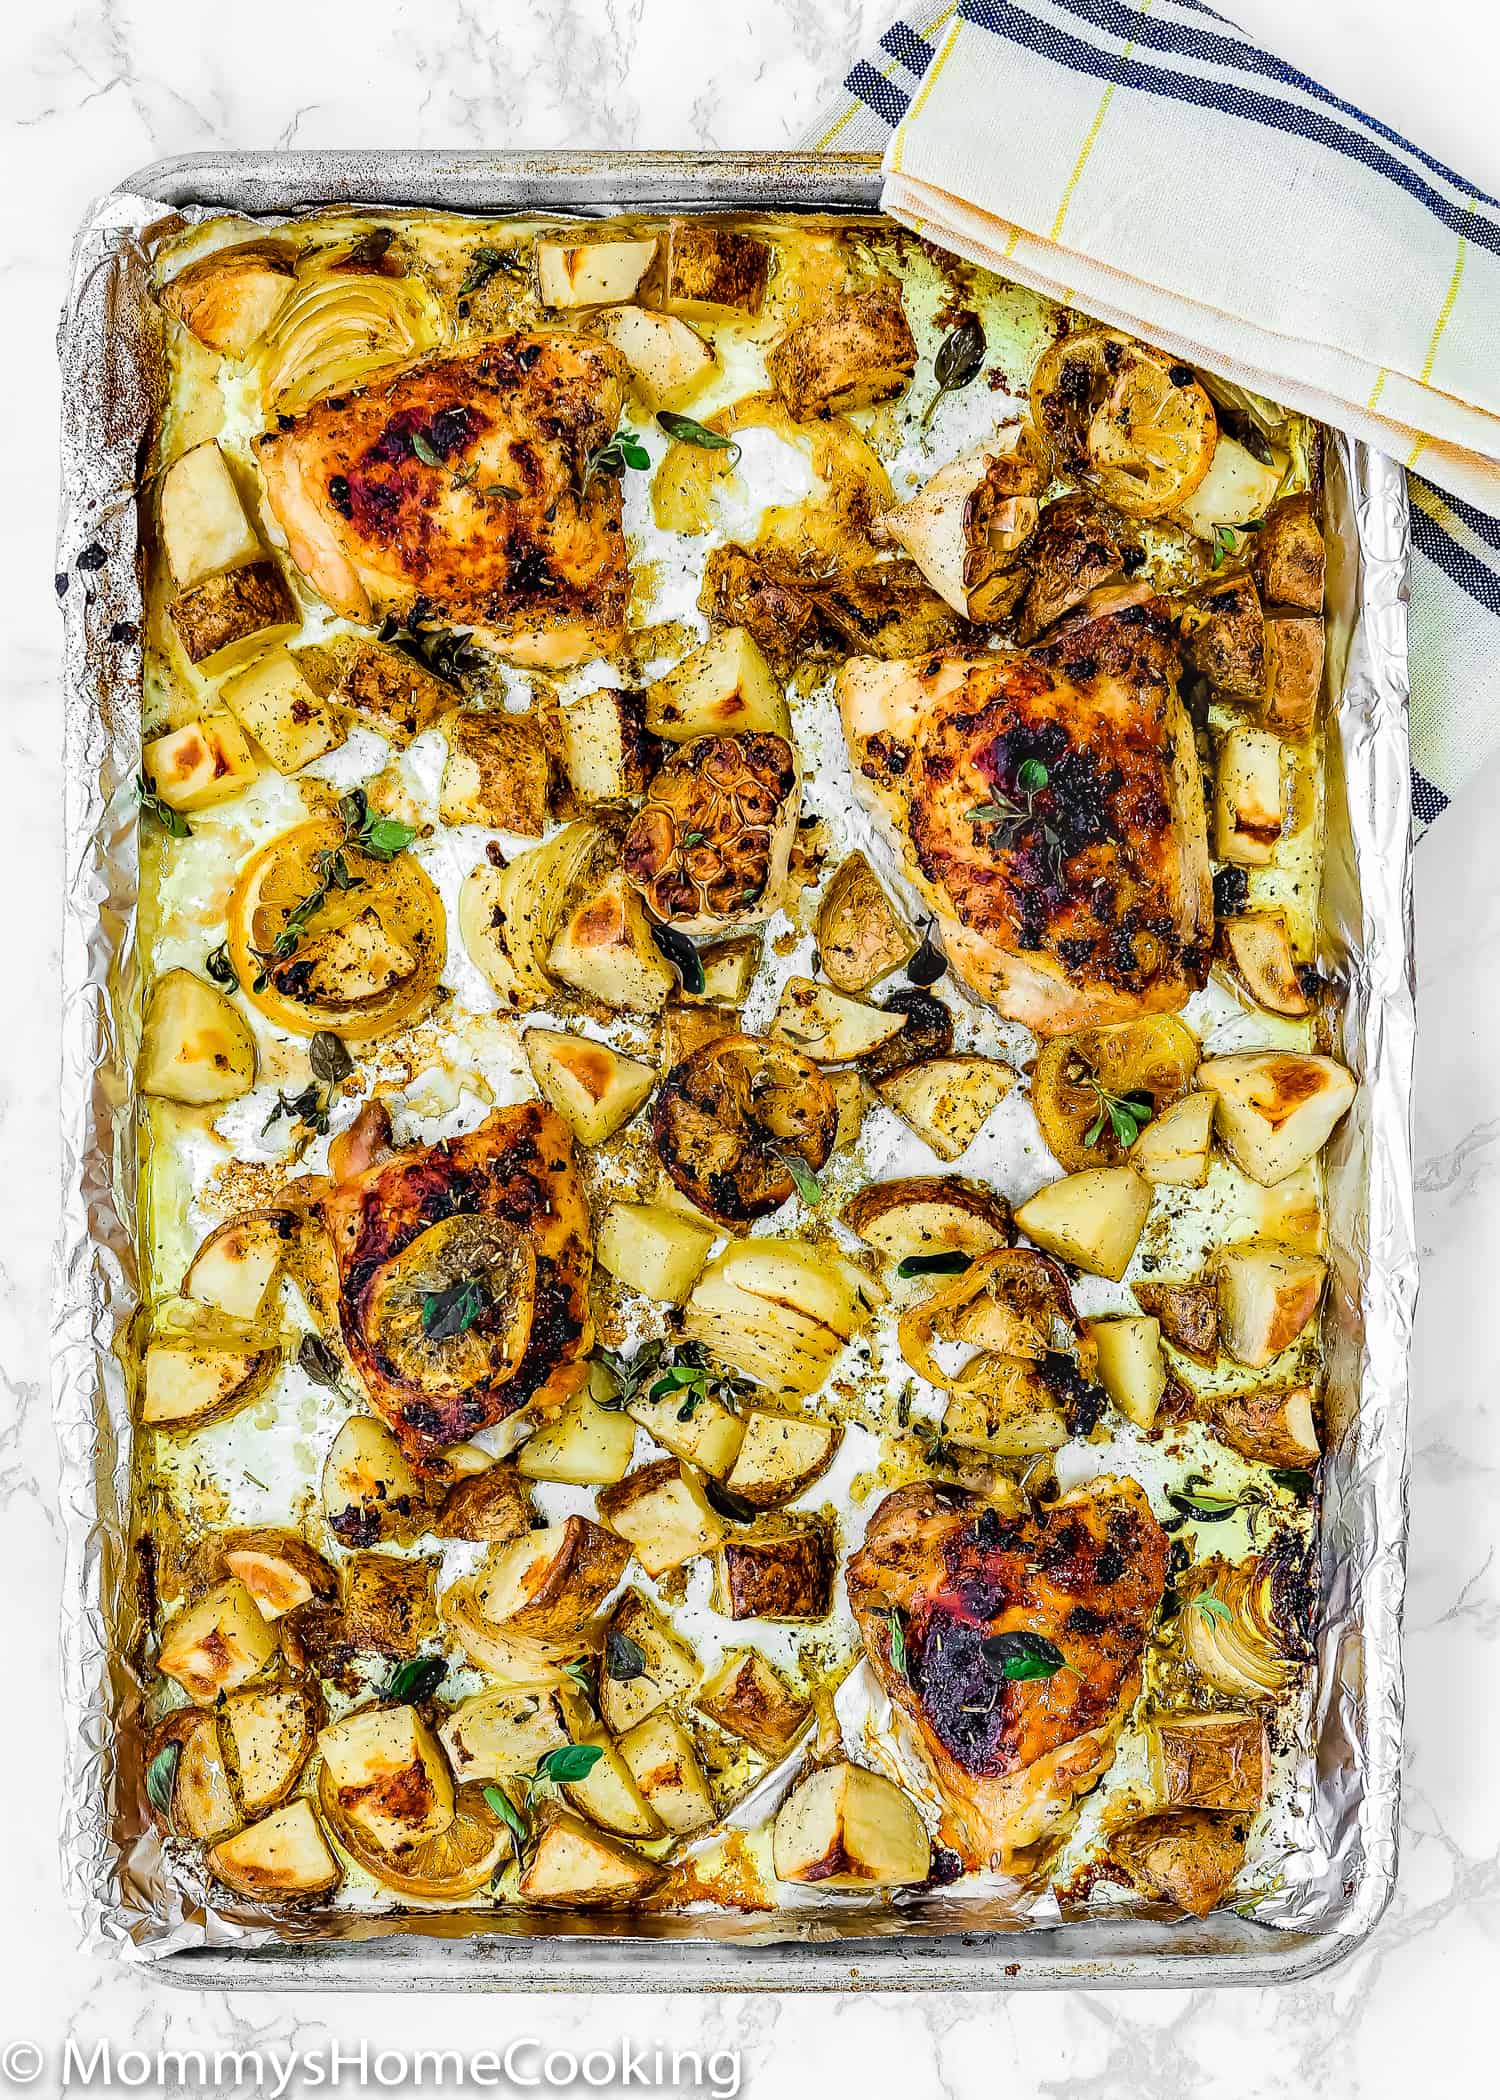  Lemon Garlic Roasted Chicken and Potatoes in a baking sheet with a kitchen towel on the side. 